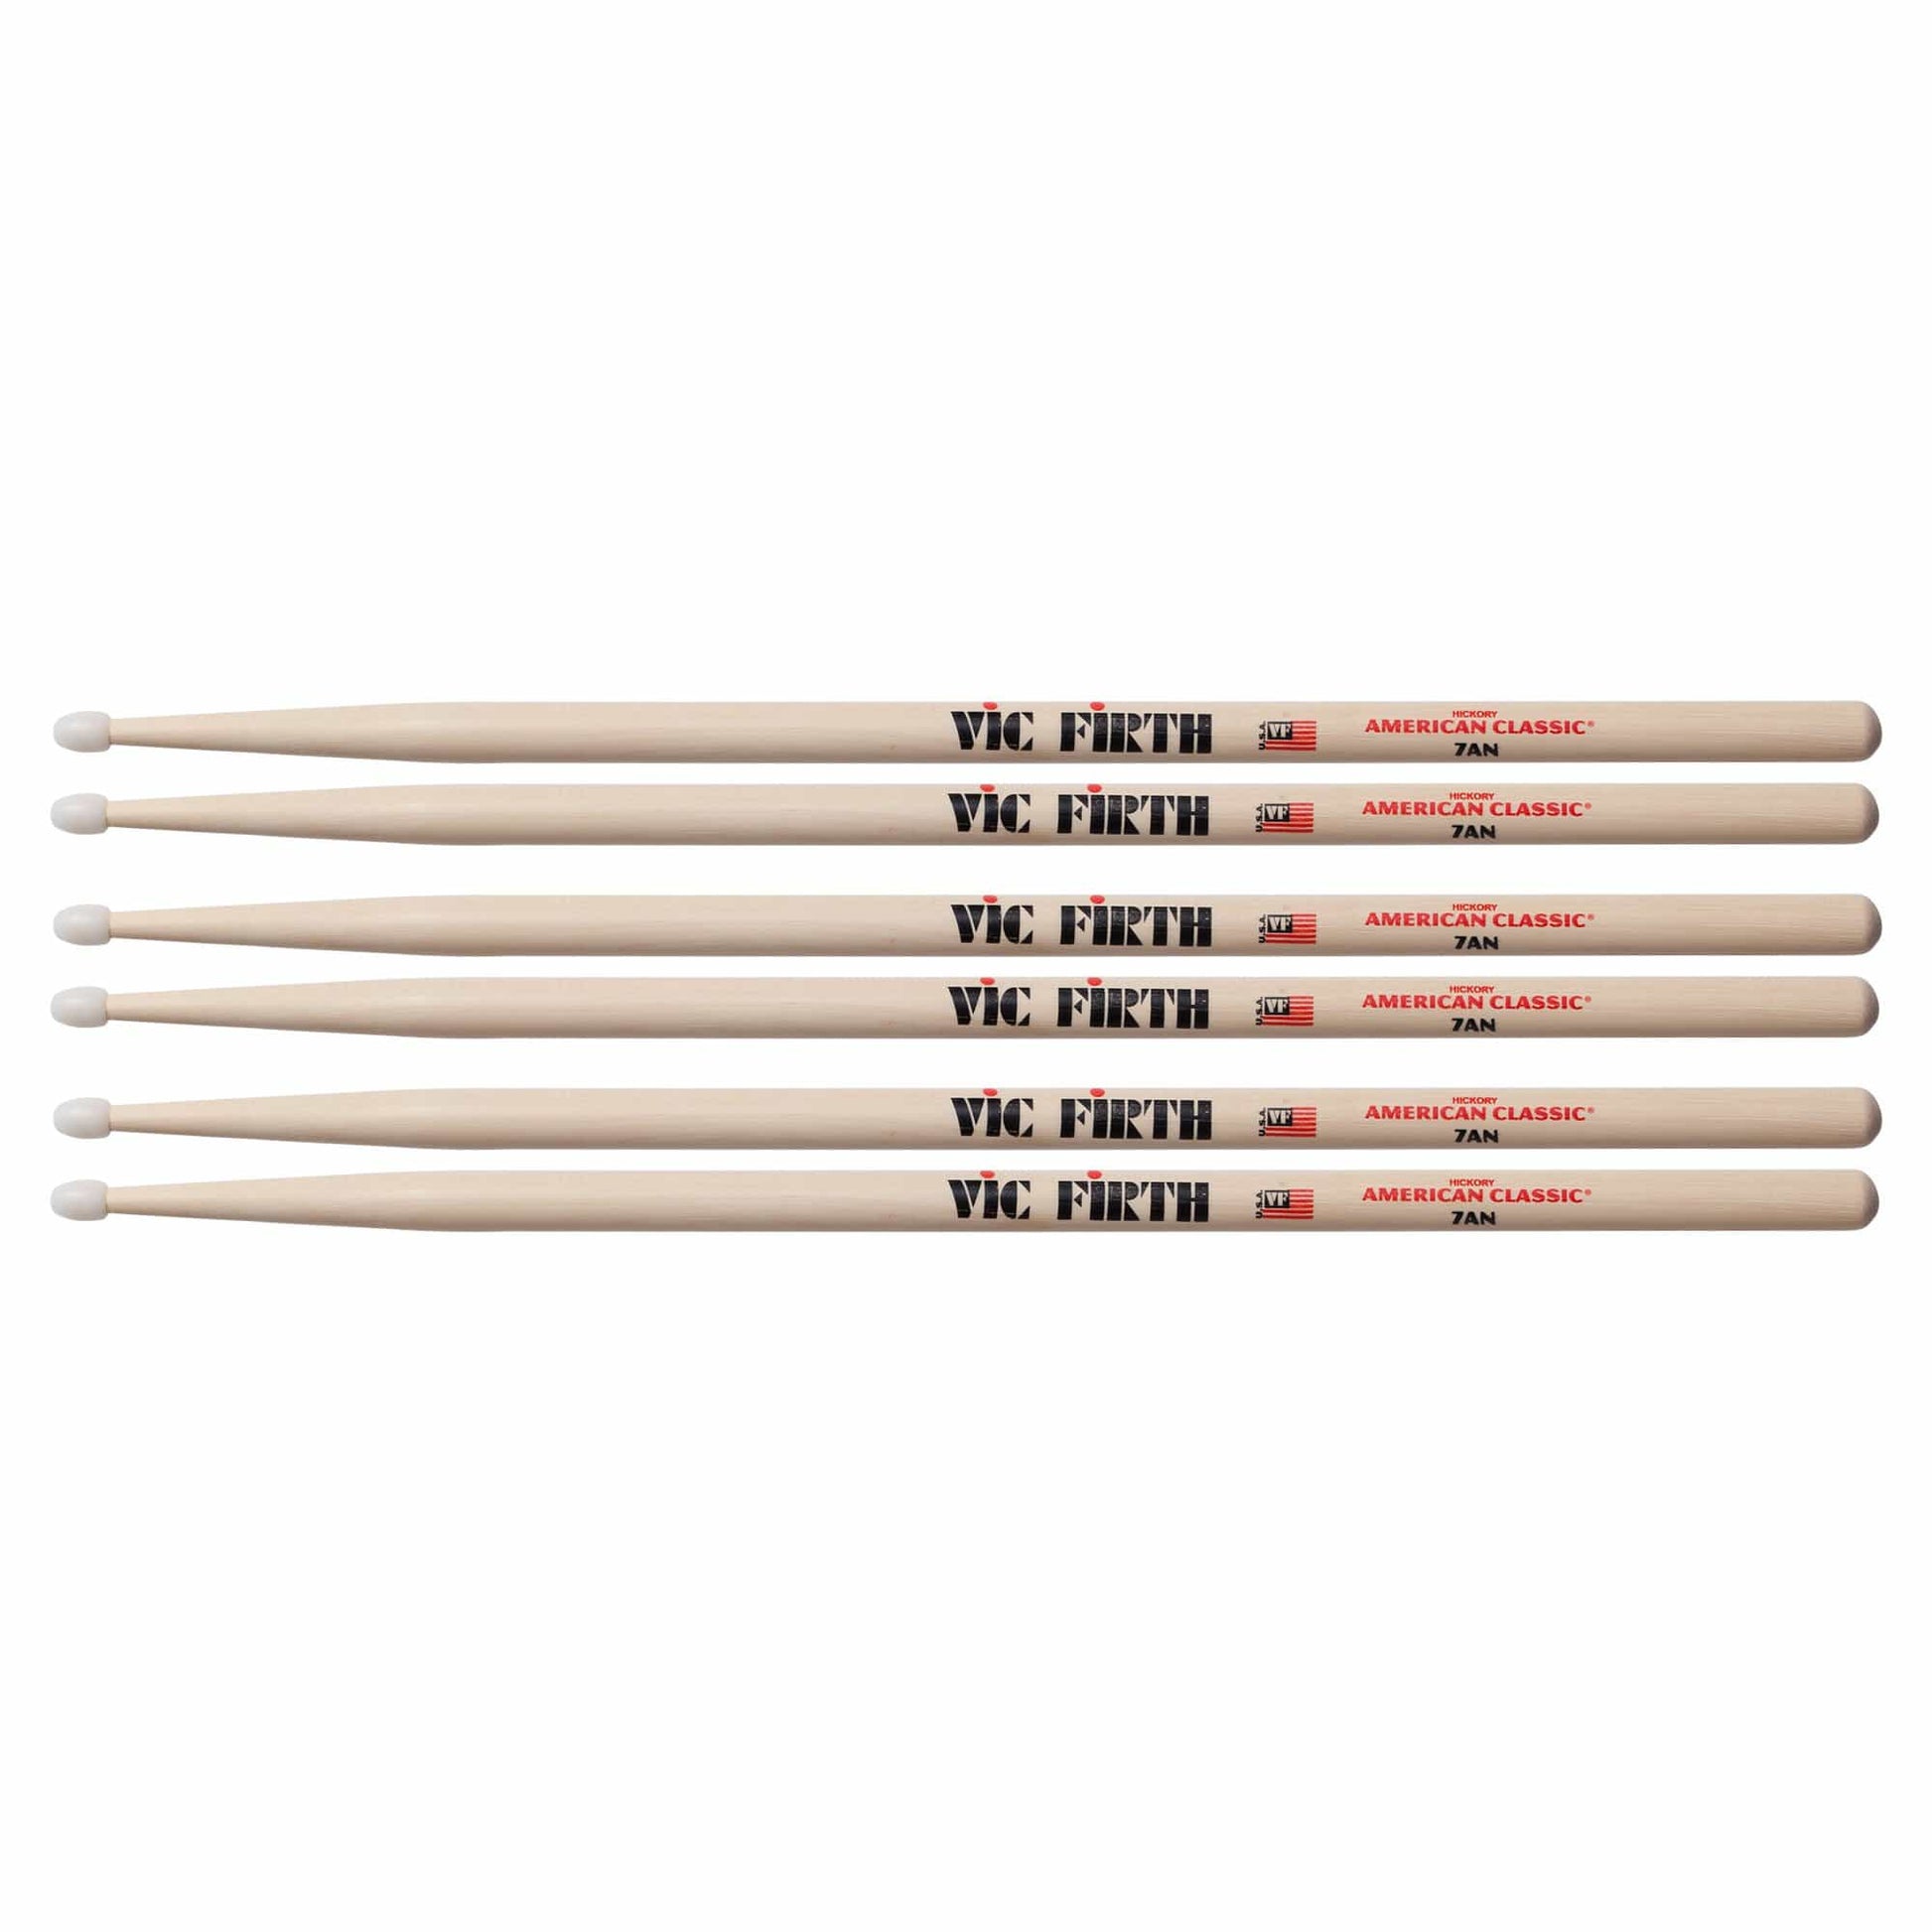 Vic Firth American Classic 7A Nylon Tip Drum Sticks (3 Pair Bundle) Drums and Percussion / Parts and Accessories / Drum Sticks and Mallets